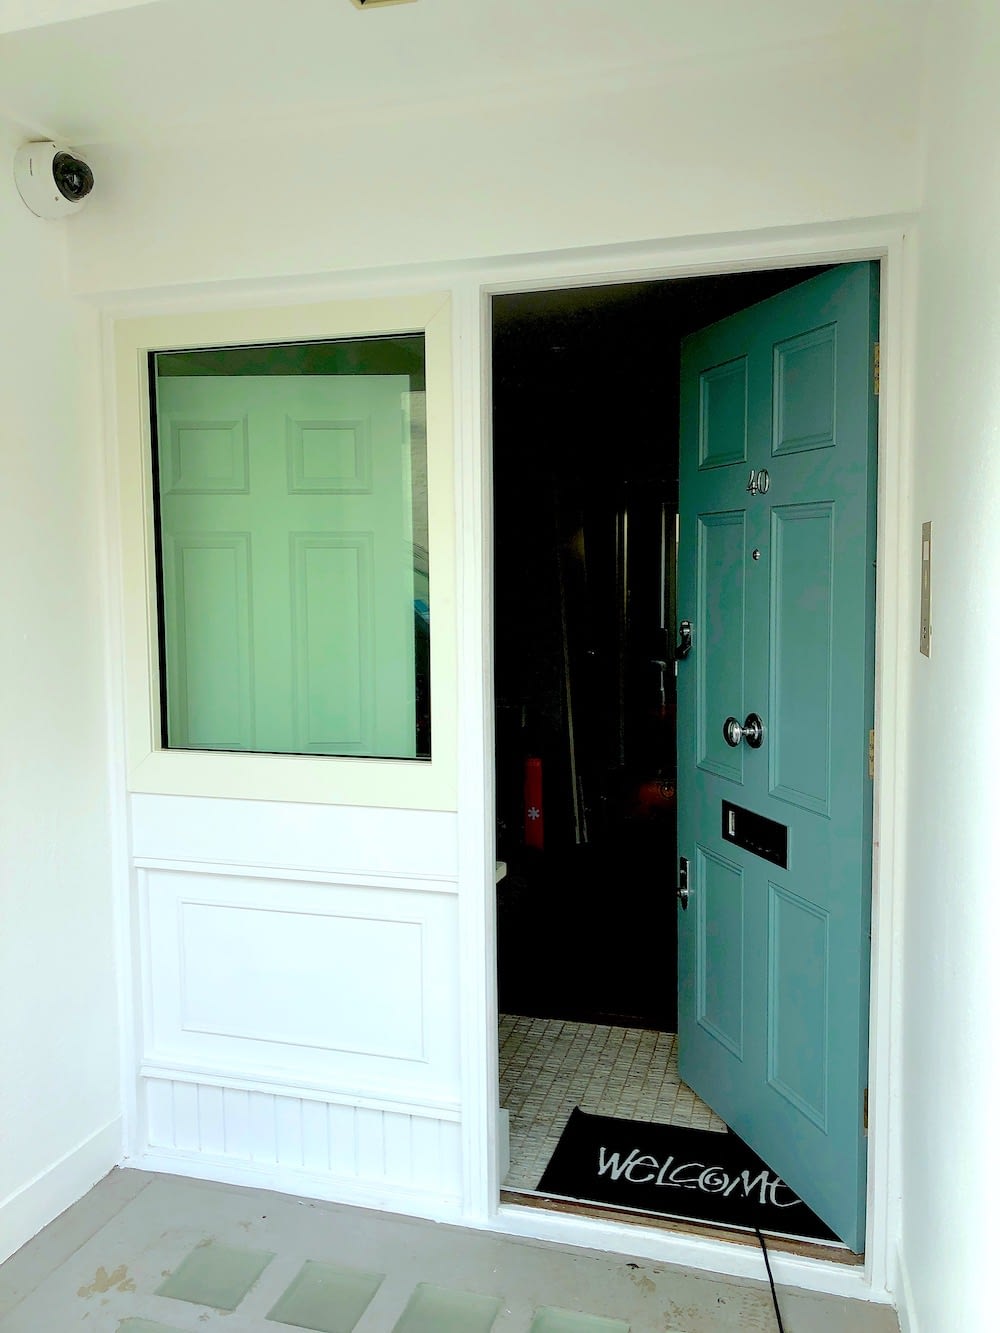 security doors in a house